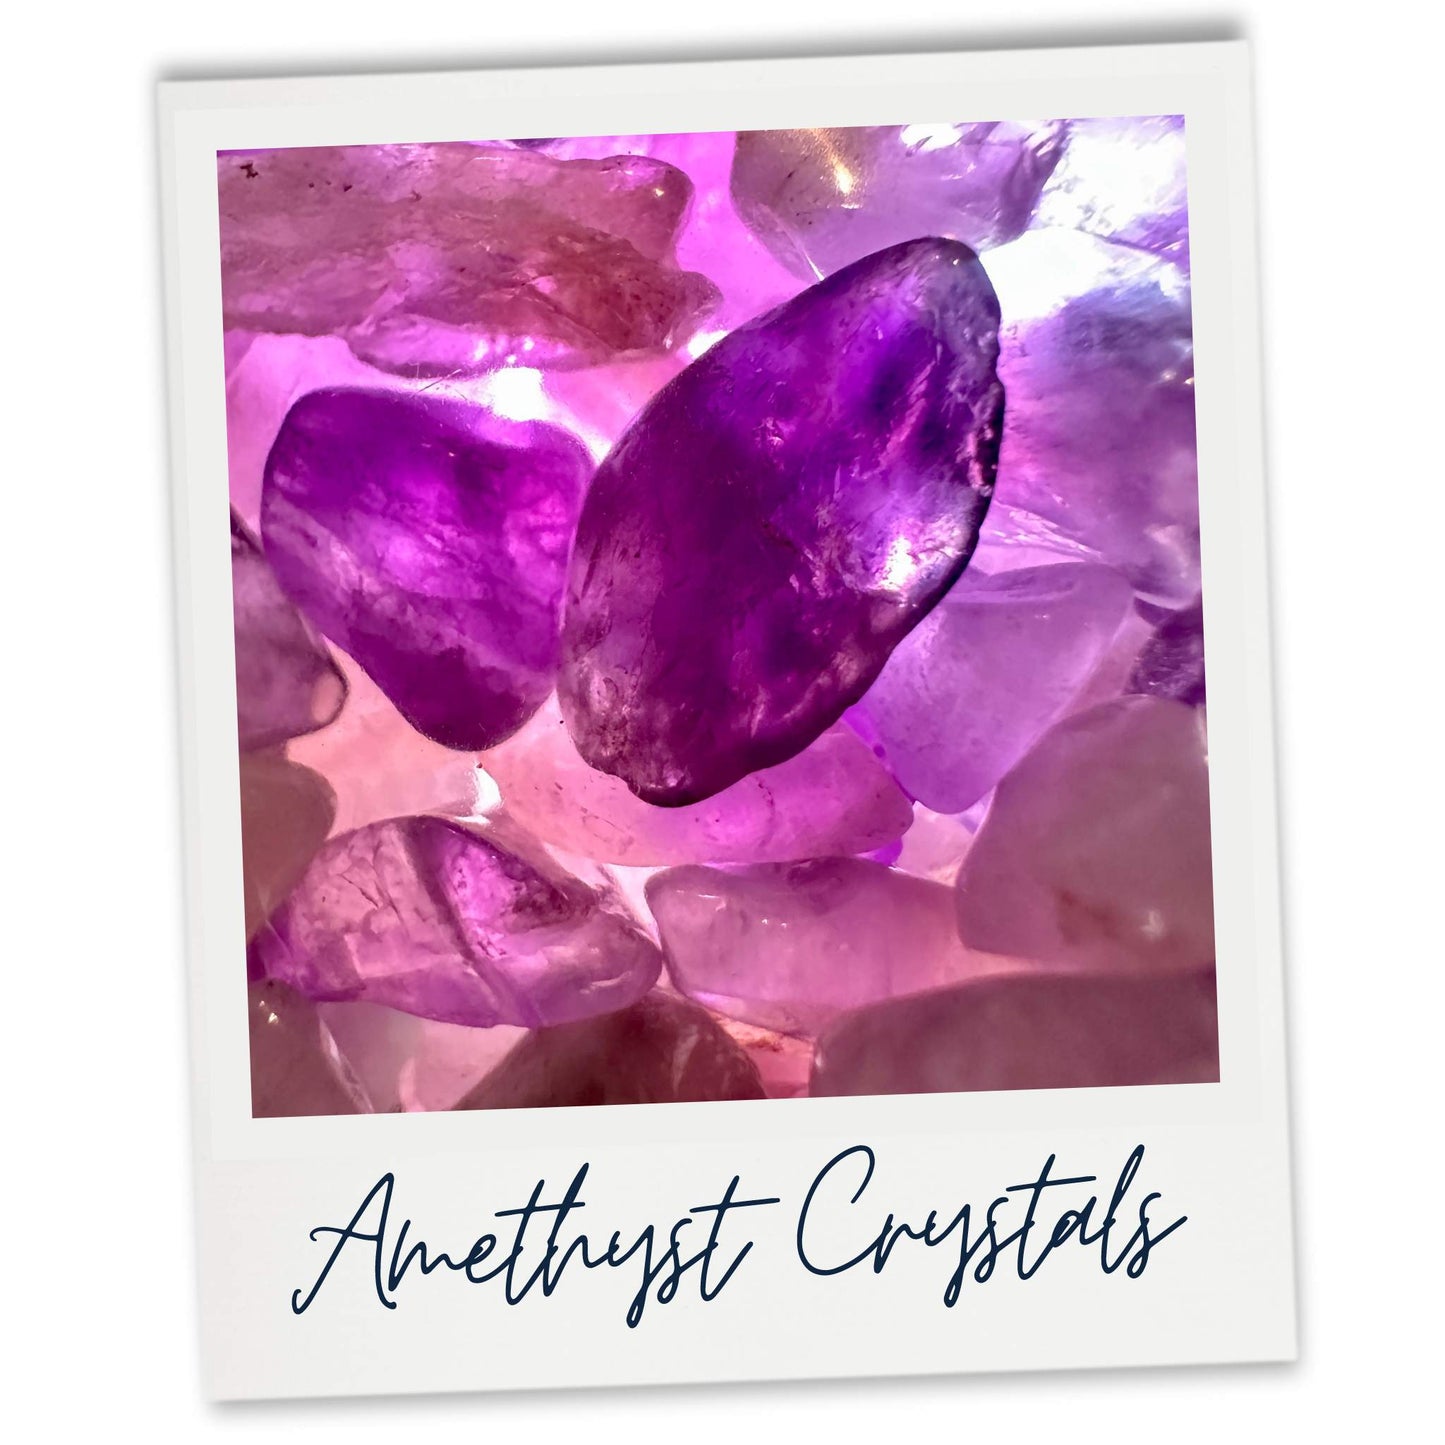 Amethyst crystal chips used in our Anxiety cleanse wax melt samples